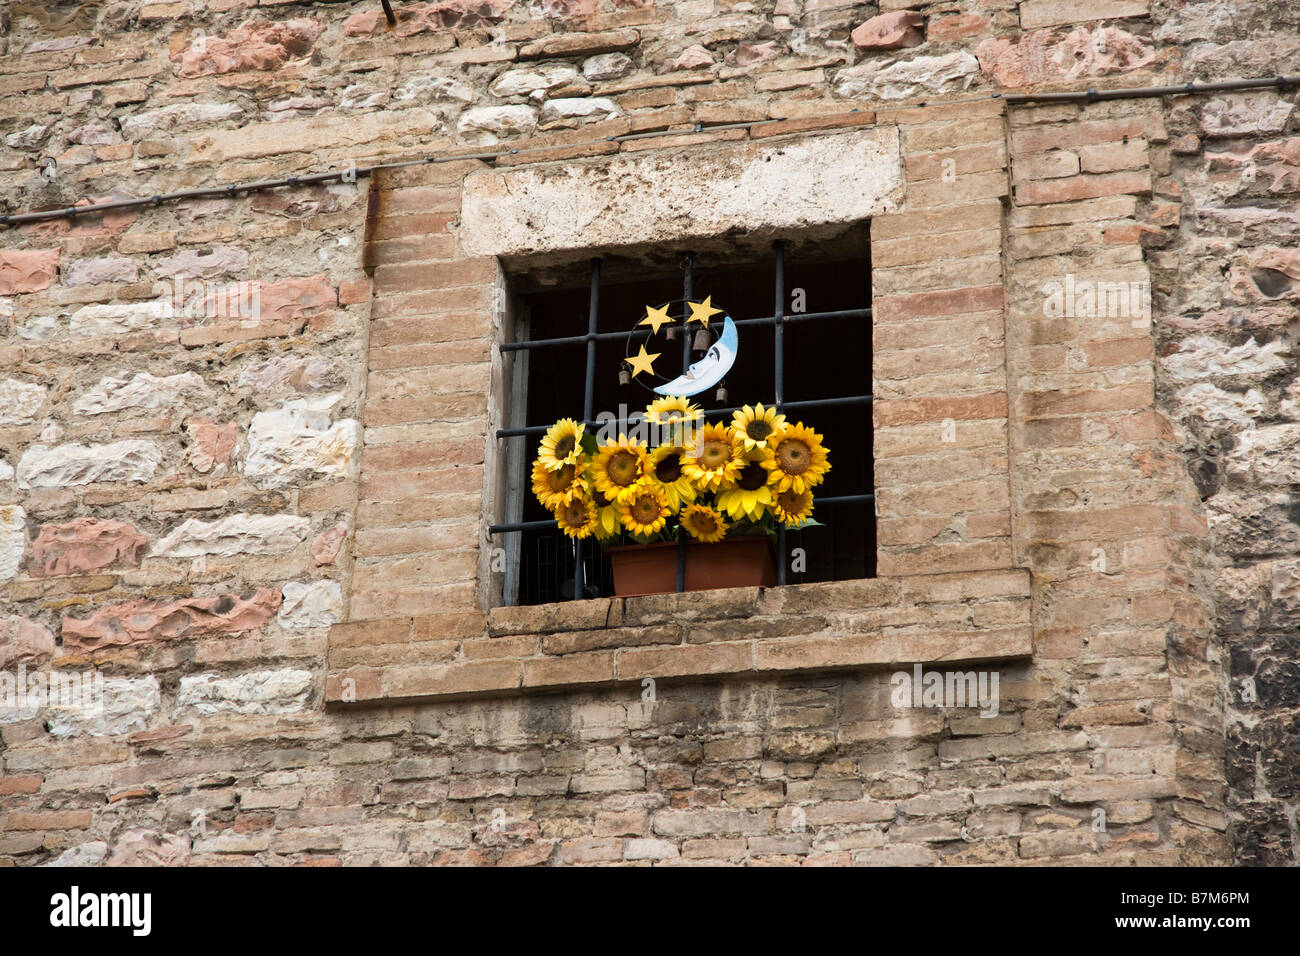 Small window with a Moon and Sunflower ornament. Stock Photo